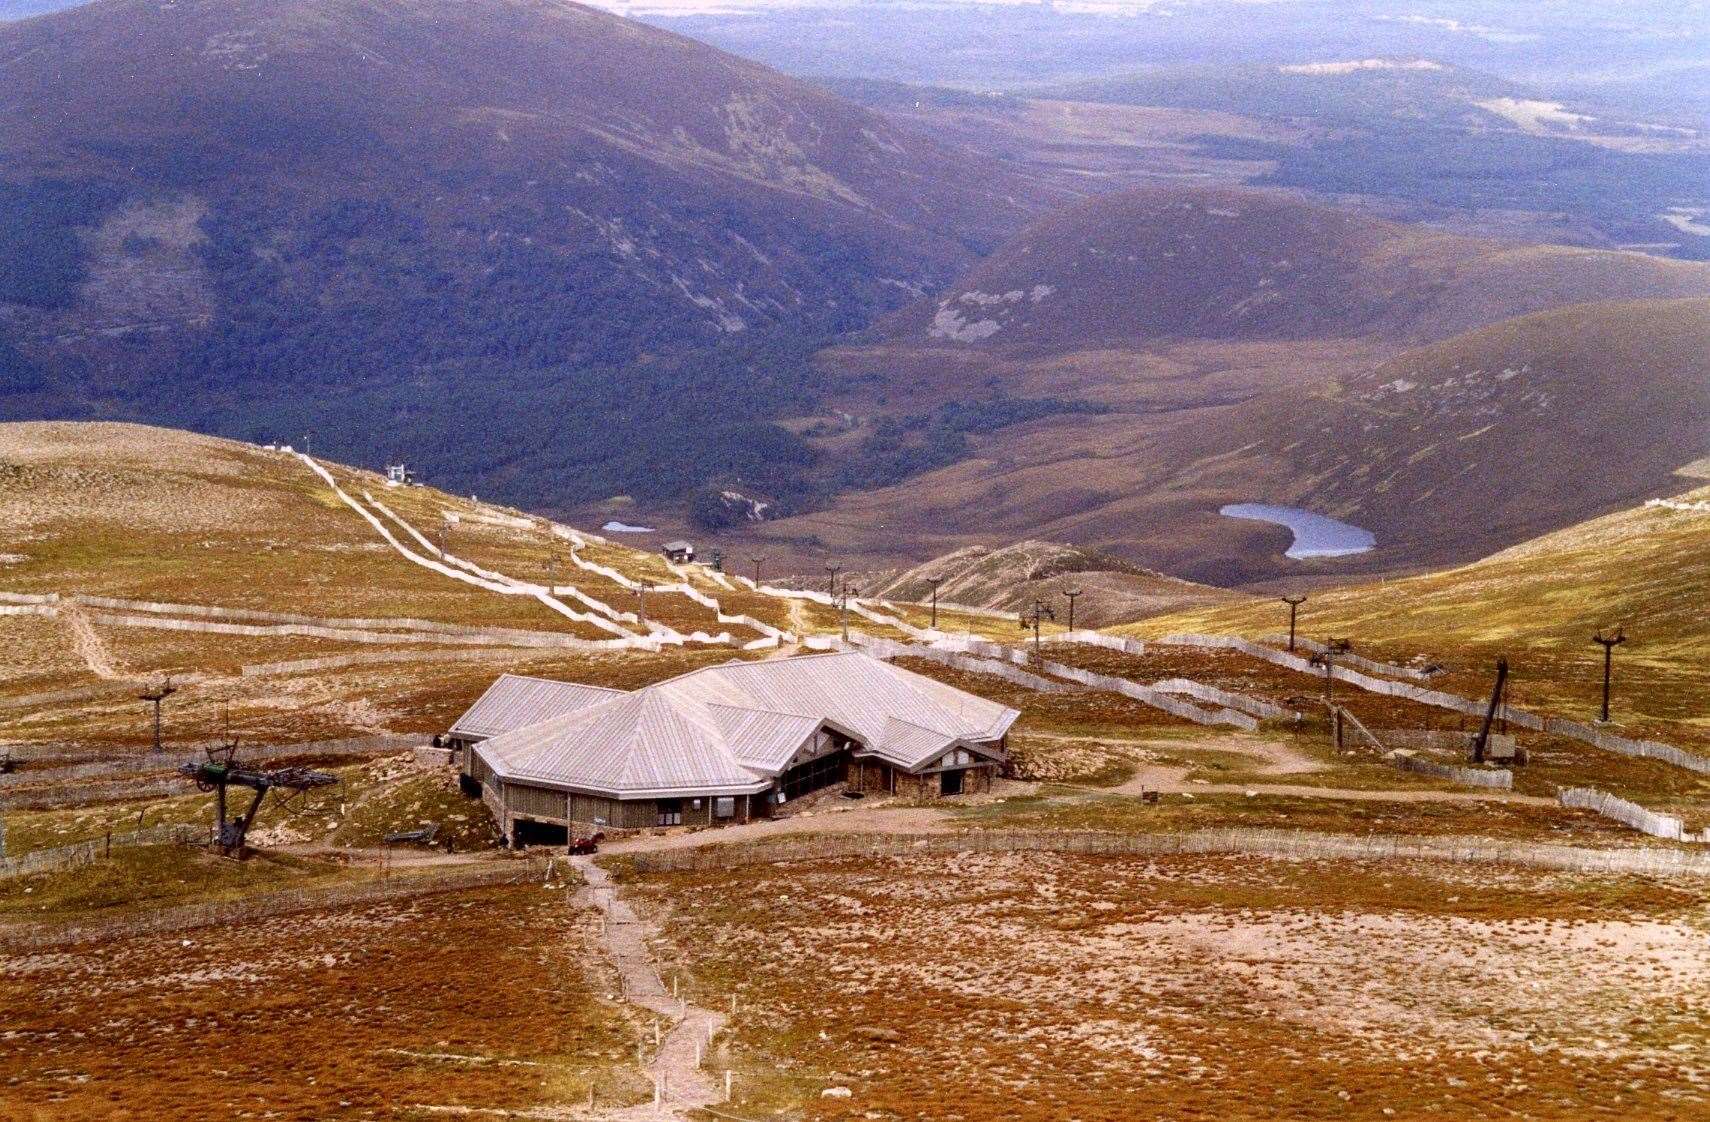 UP FOR REVIEW: There are expected to be trials in 2022 for opening access to visitors onto the Cairngorm plateau without being on a guided walk.